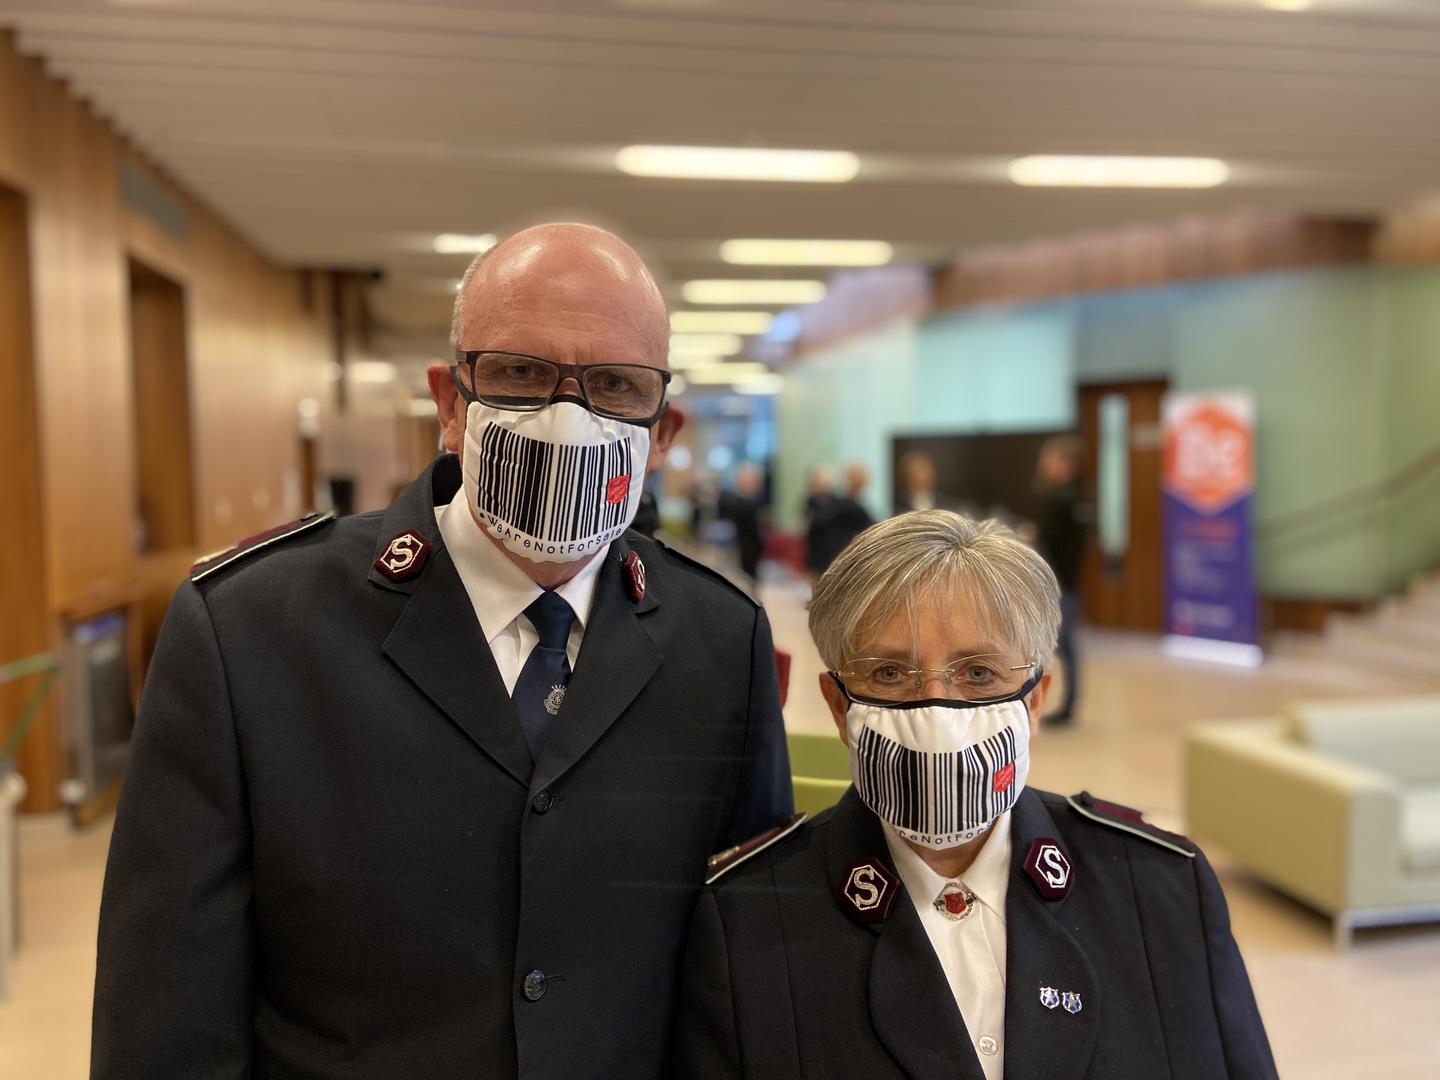 Territorial leaders wearing the #WeAreNotForSale face masks